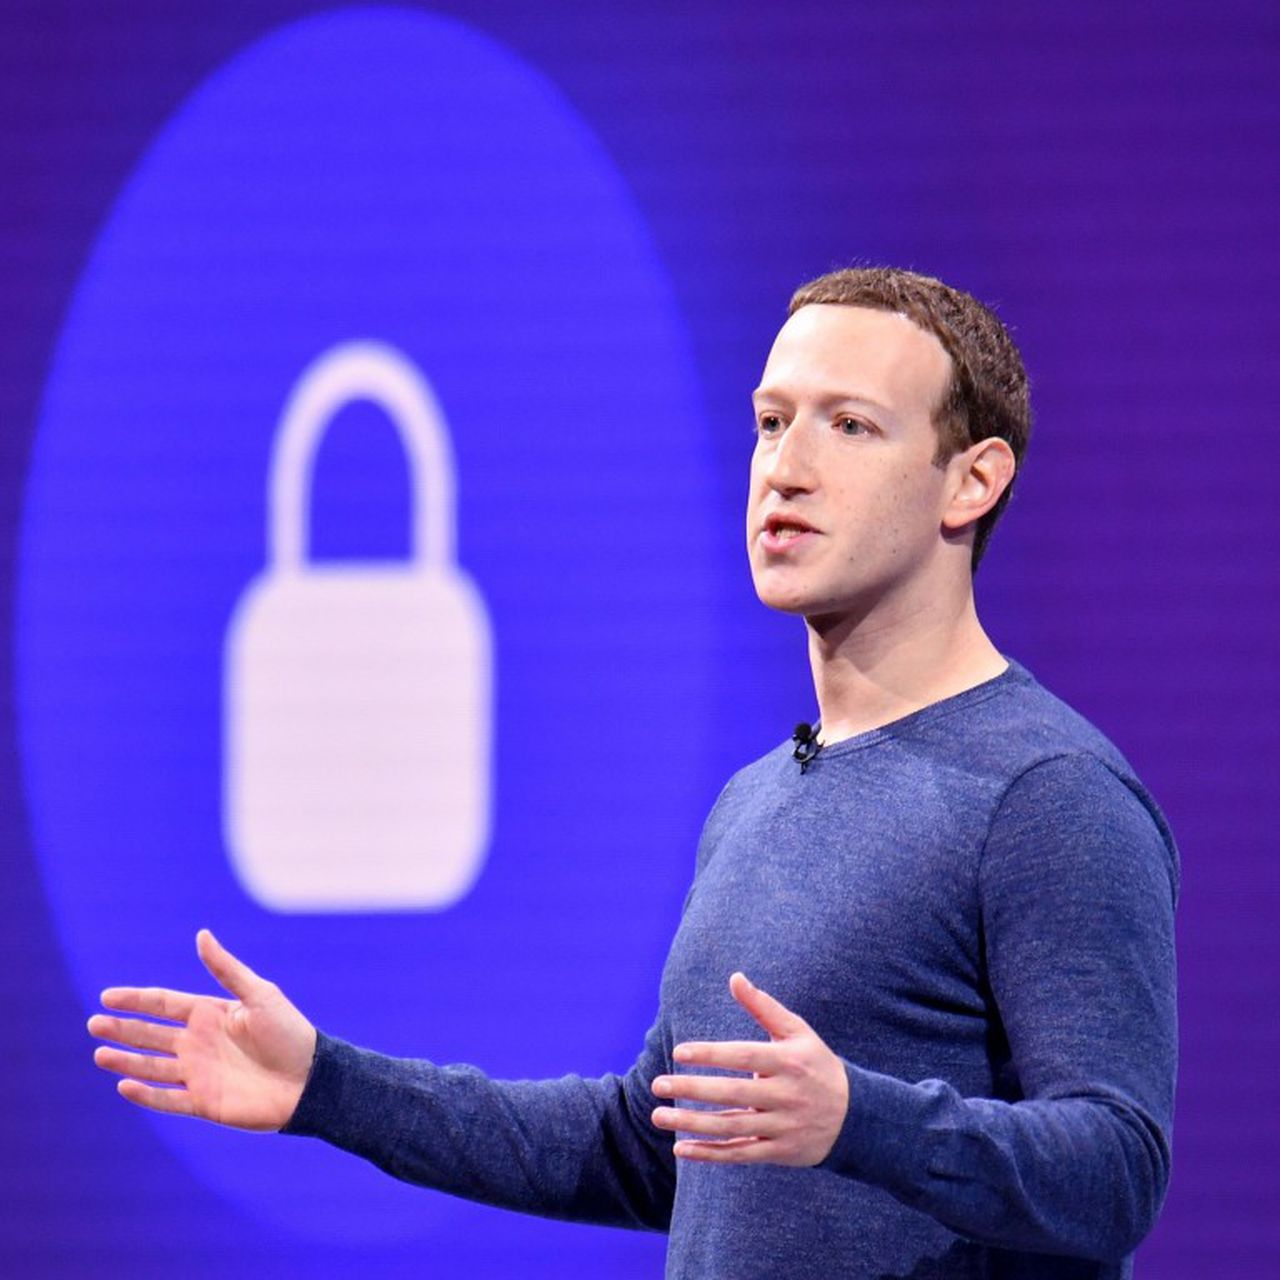 Mark Zuckerberg to discuss company policies with employees